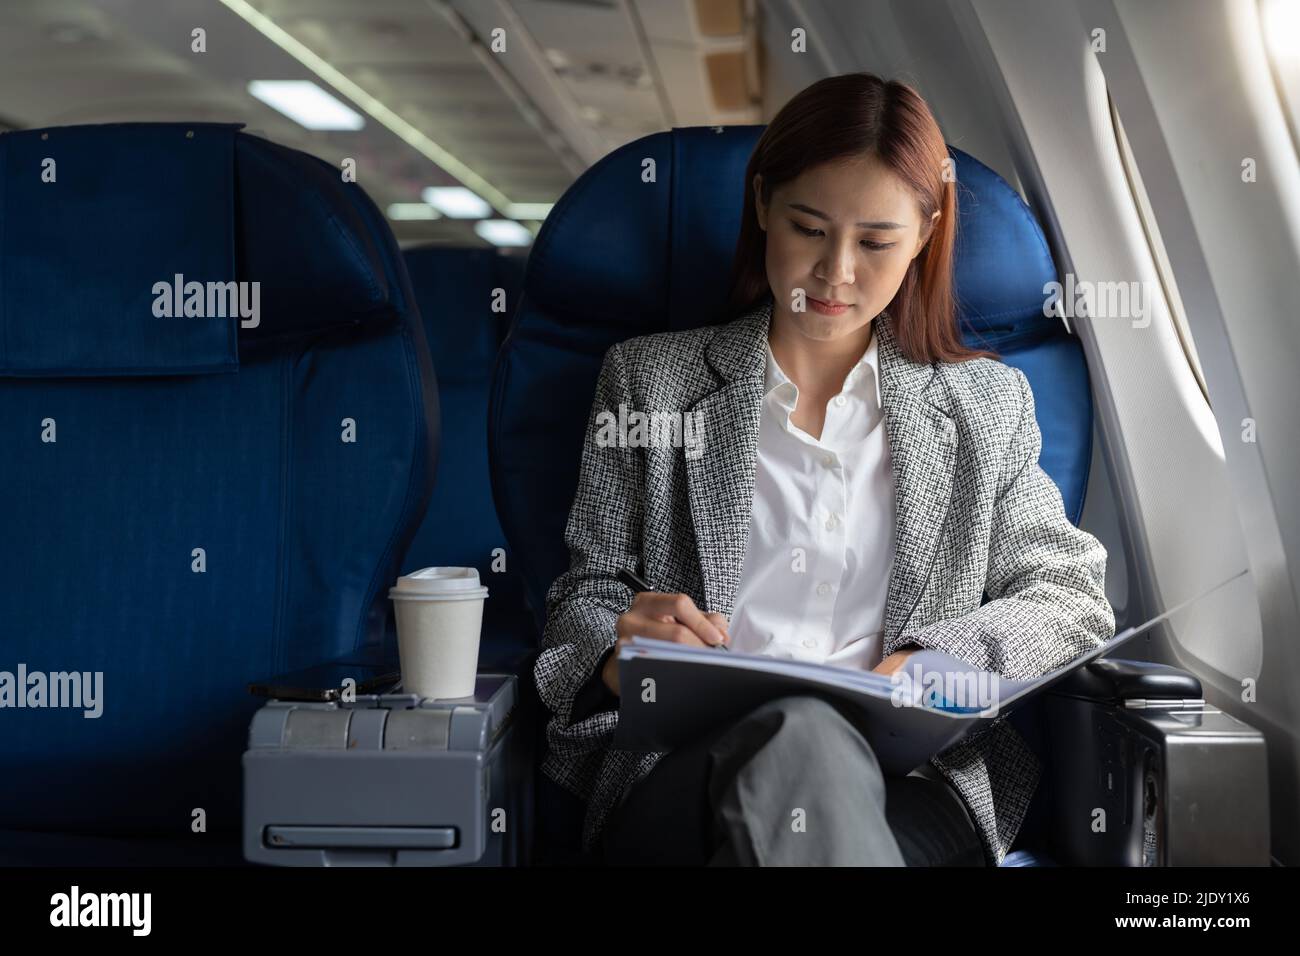 Asian female entrepreneur working on paperwork finance report sitting near window in an airplane Stock Photo